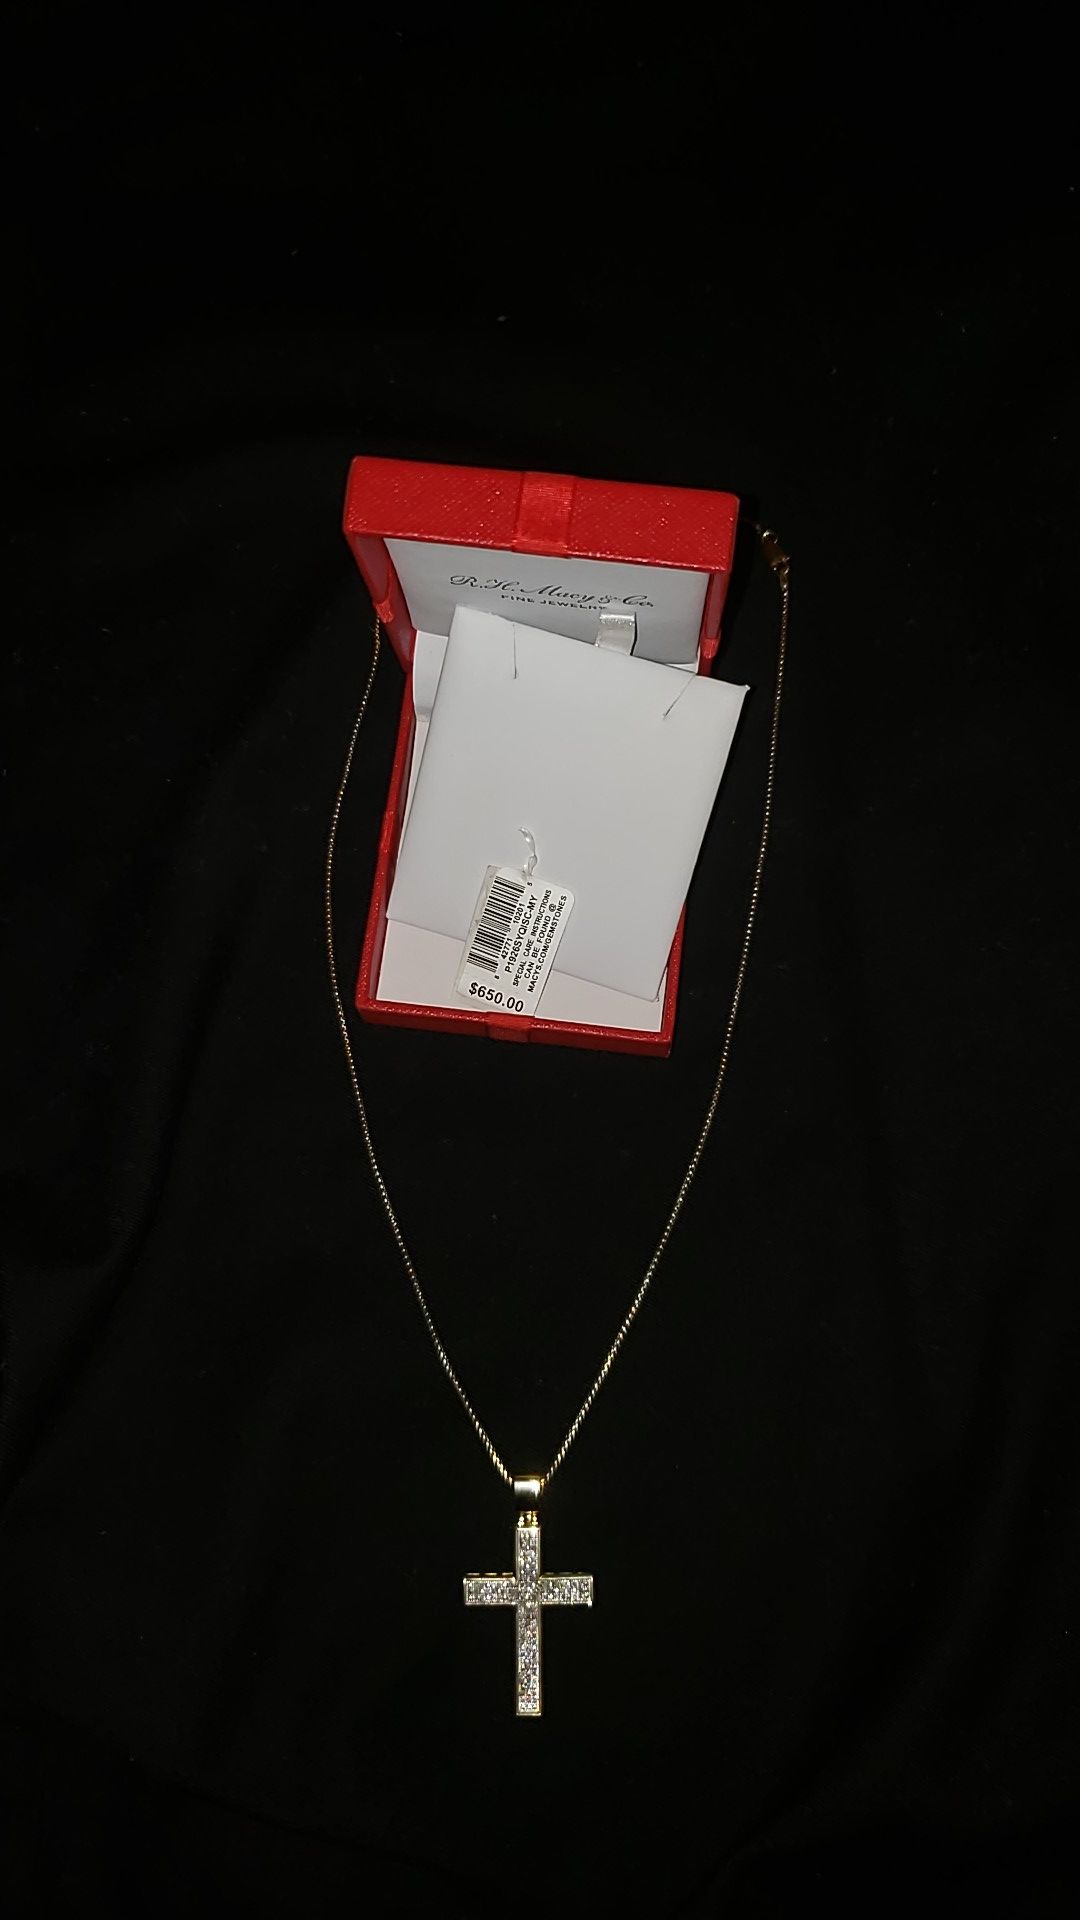 10k gold chain with small diamonds in the pendent